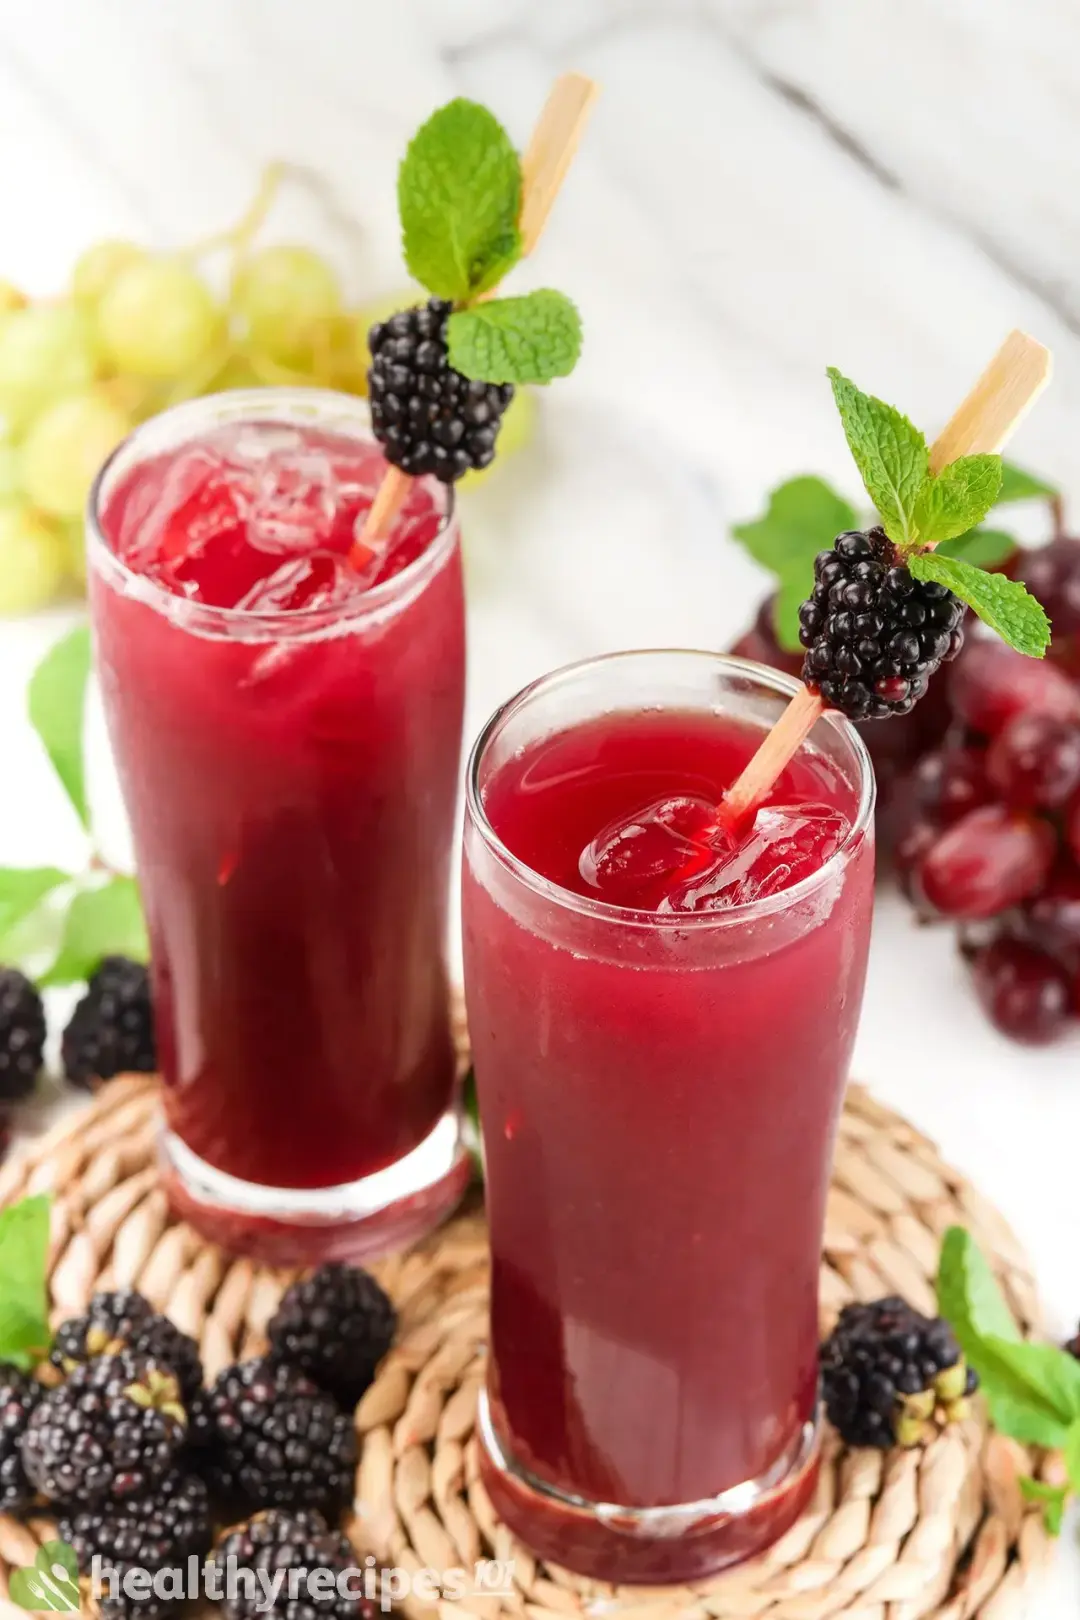 Two iced glasses of black berry juice drinks, with straws, mints, put next to a bunch of blackberry